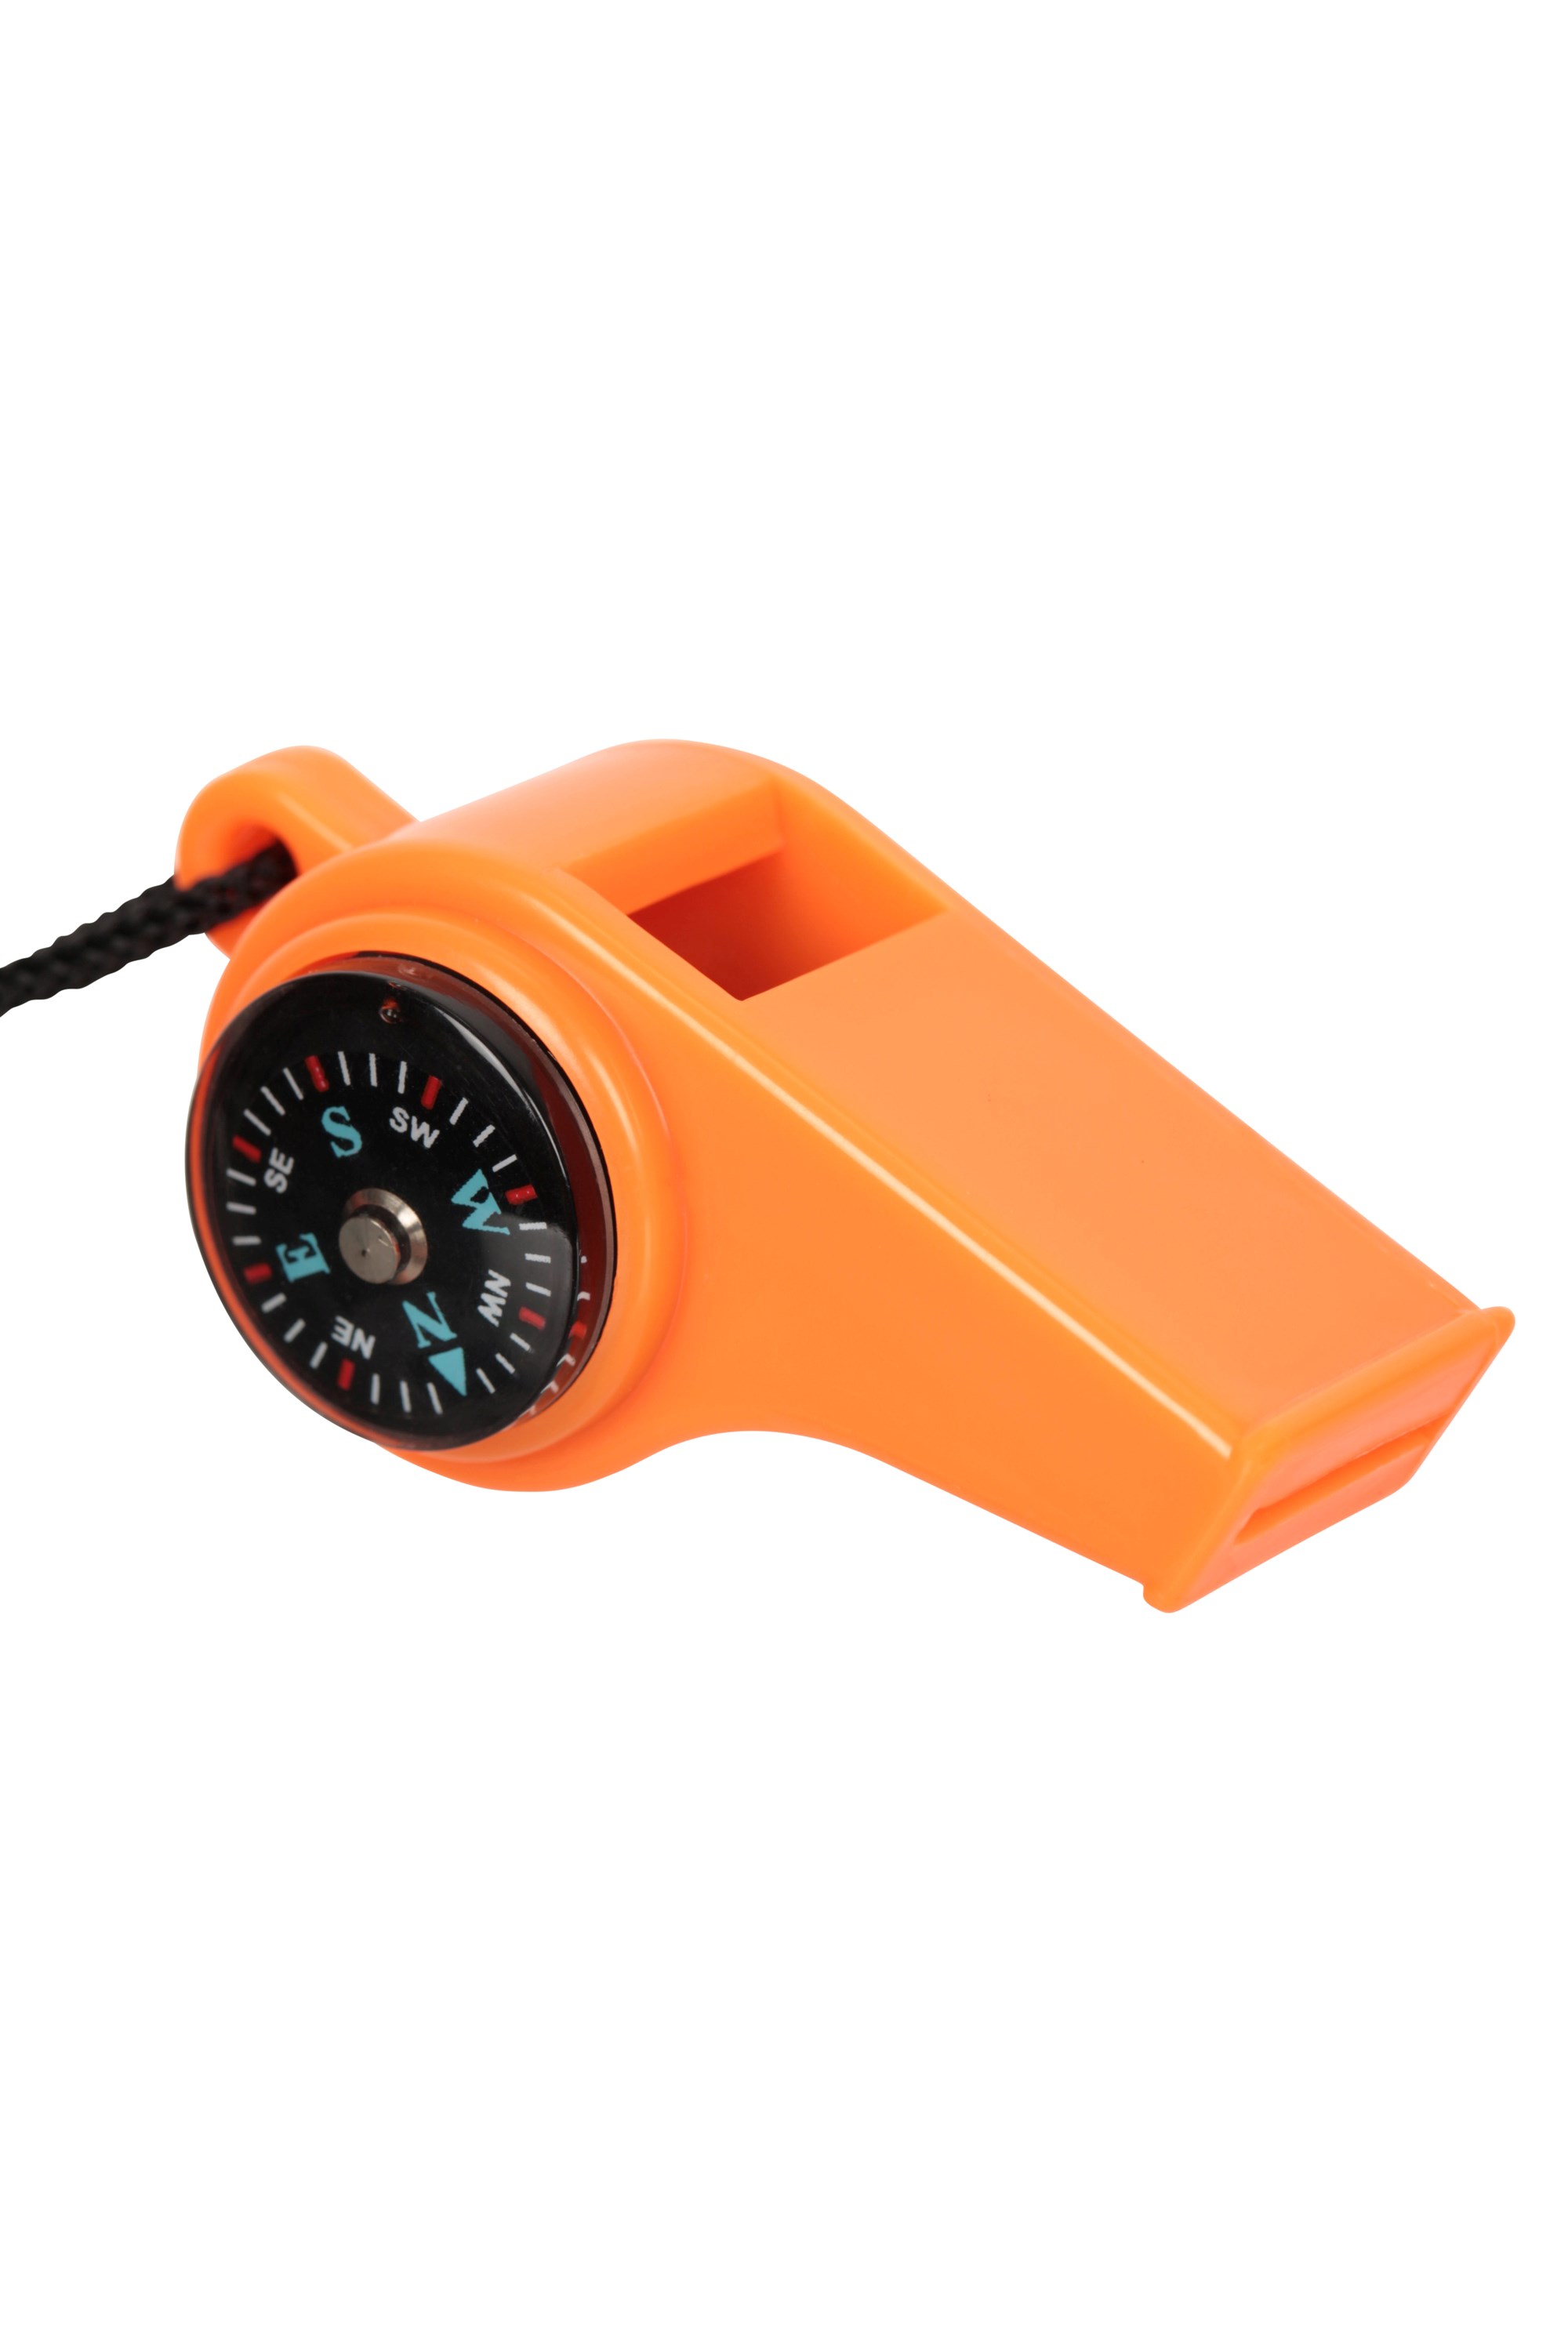 https://img.cdn.mountainwarehouse.com/product/022435/022435_ora_3_in_1_emergency_whistle_with_compass_har_aw23_01.jpg